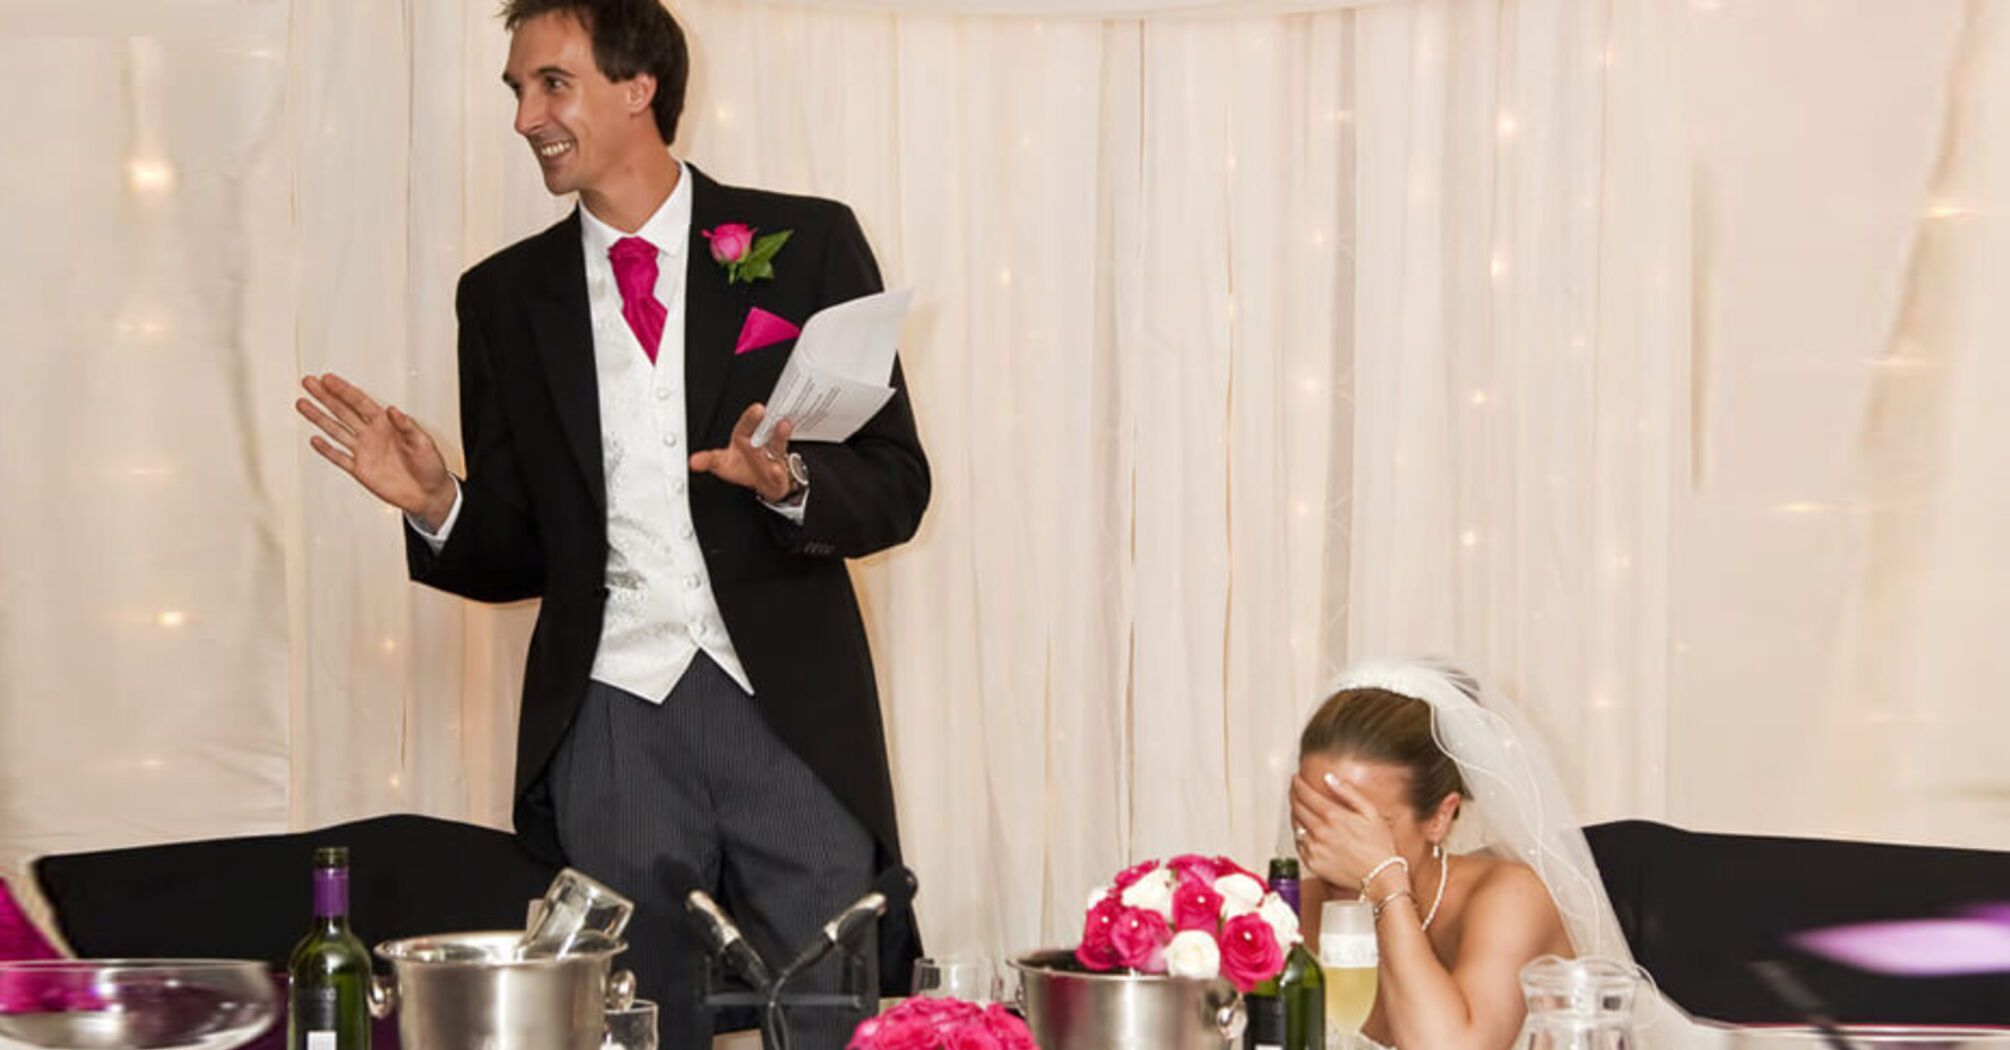 What not to give for the wedding